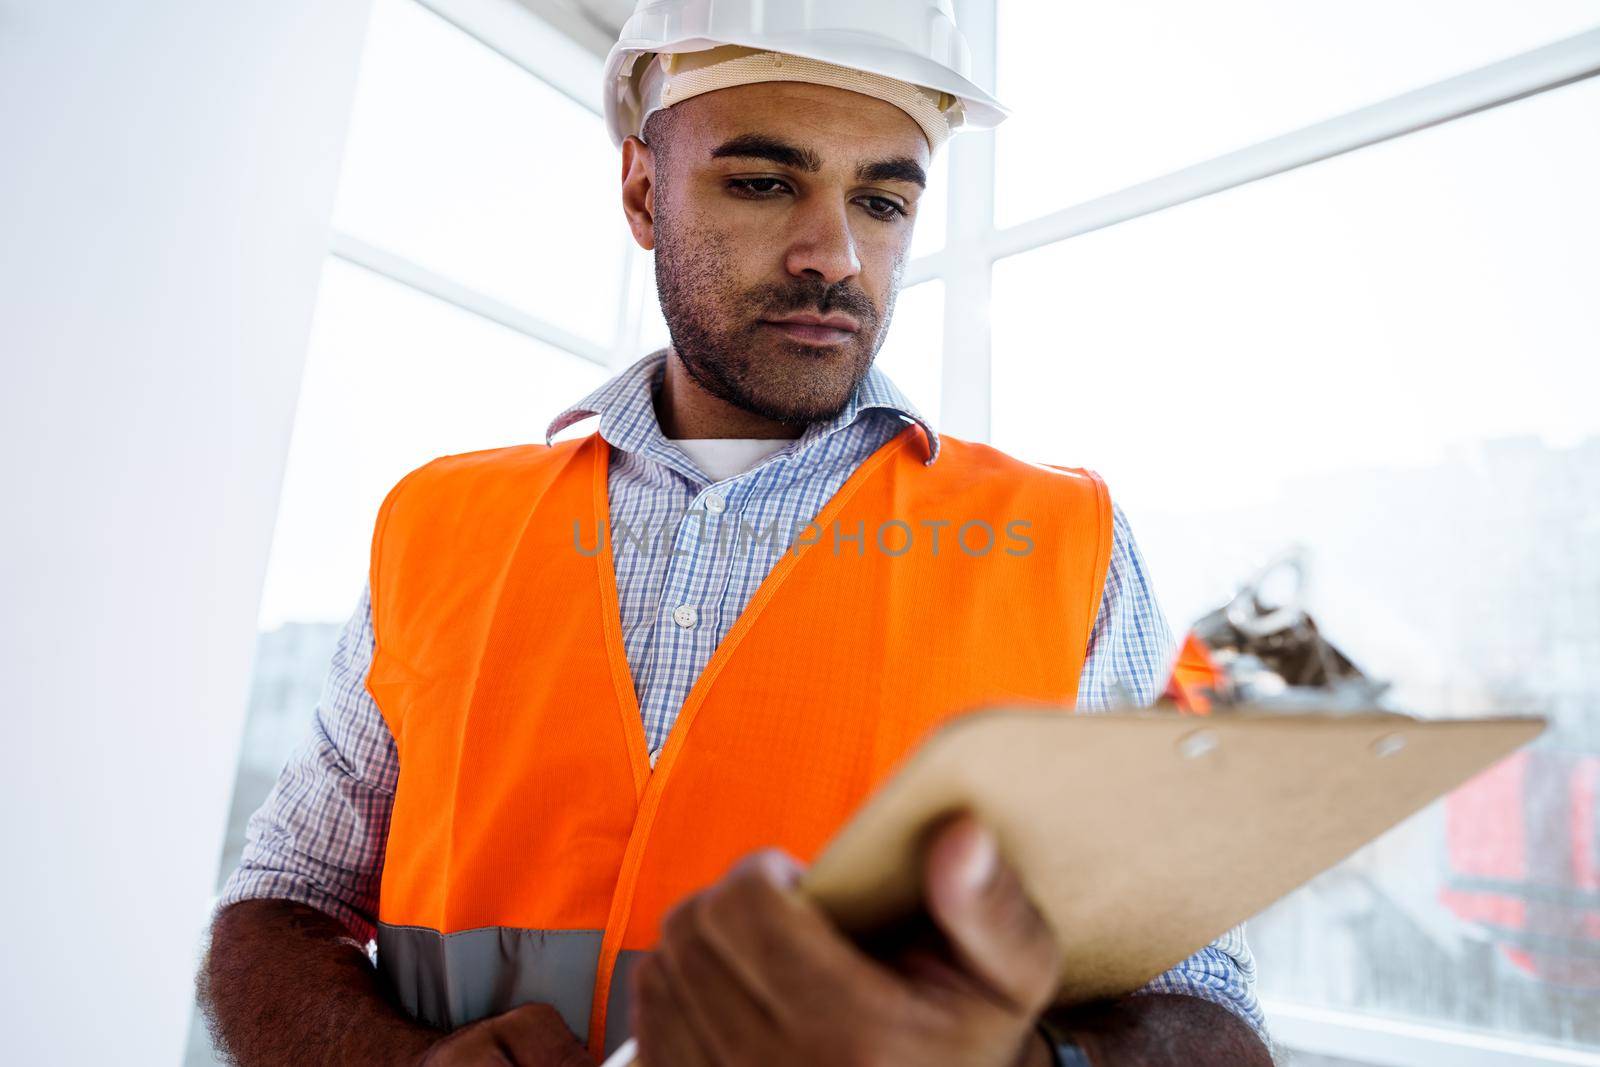 Foreman at work on construction site checking his notes on clipboard, close up